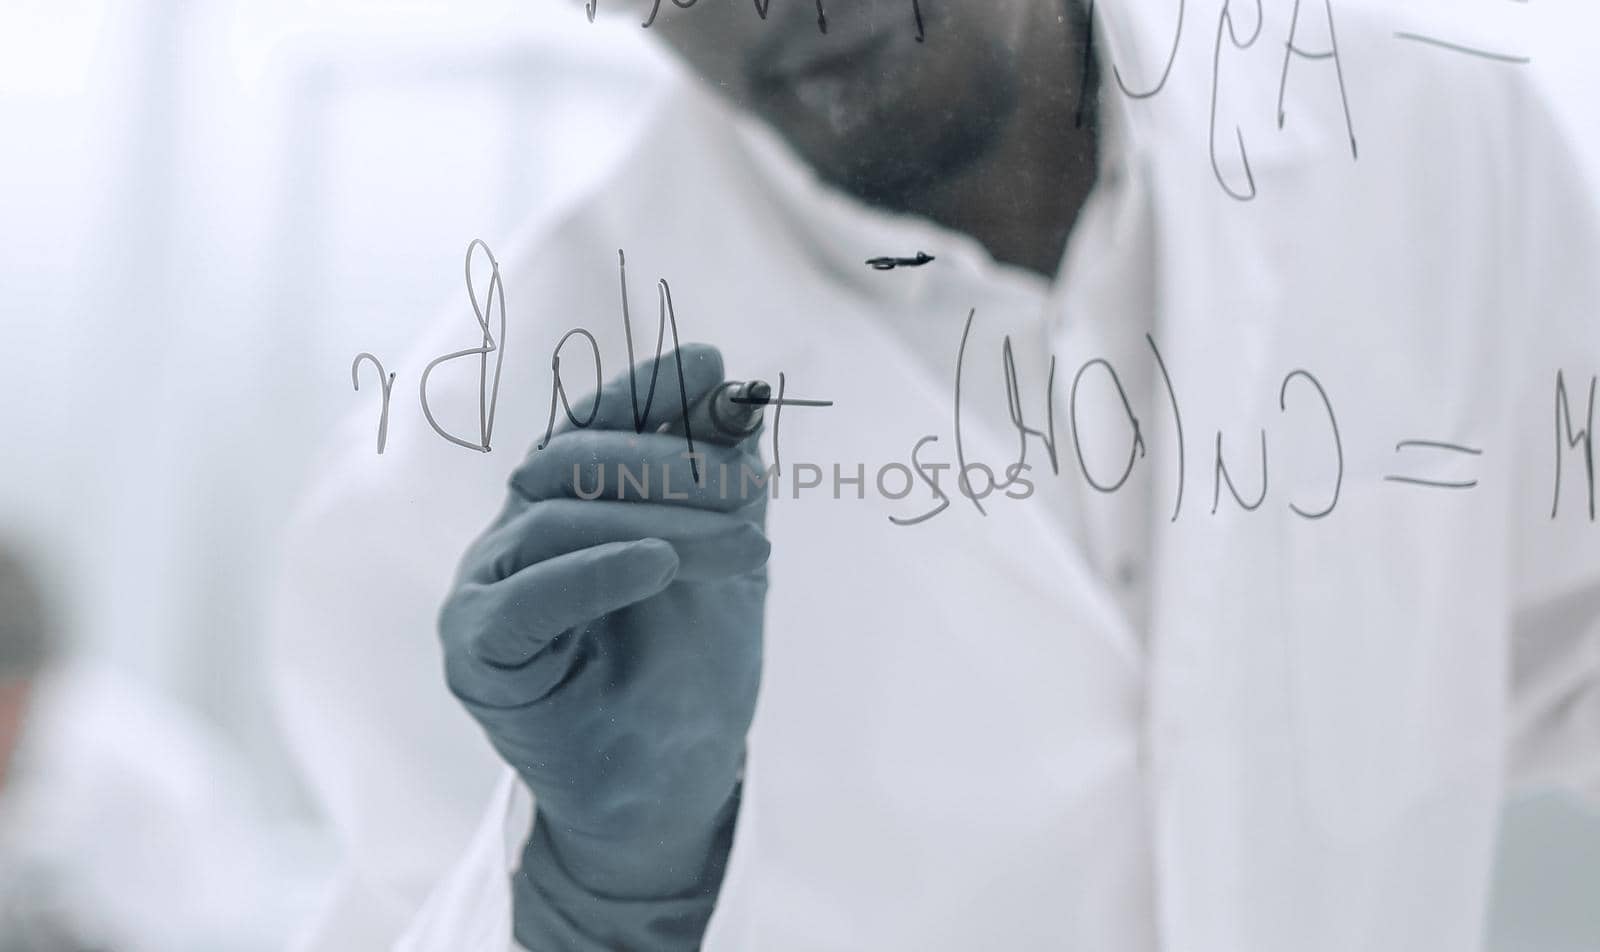 scientist writing chemical formula on a glass Board.photo with copy space